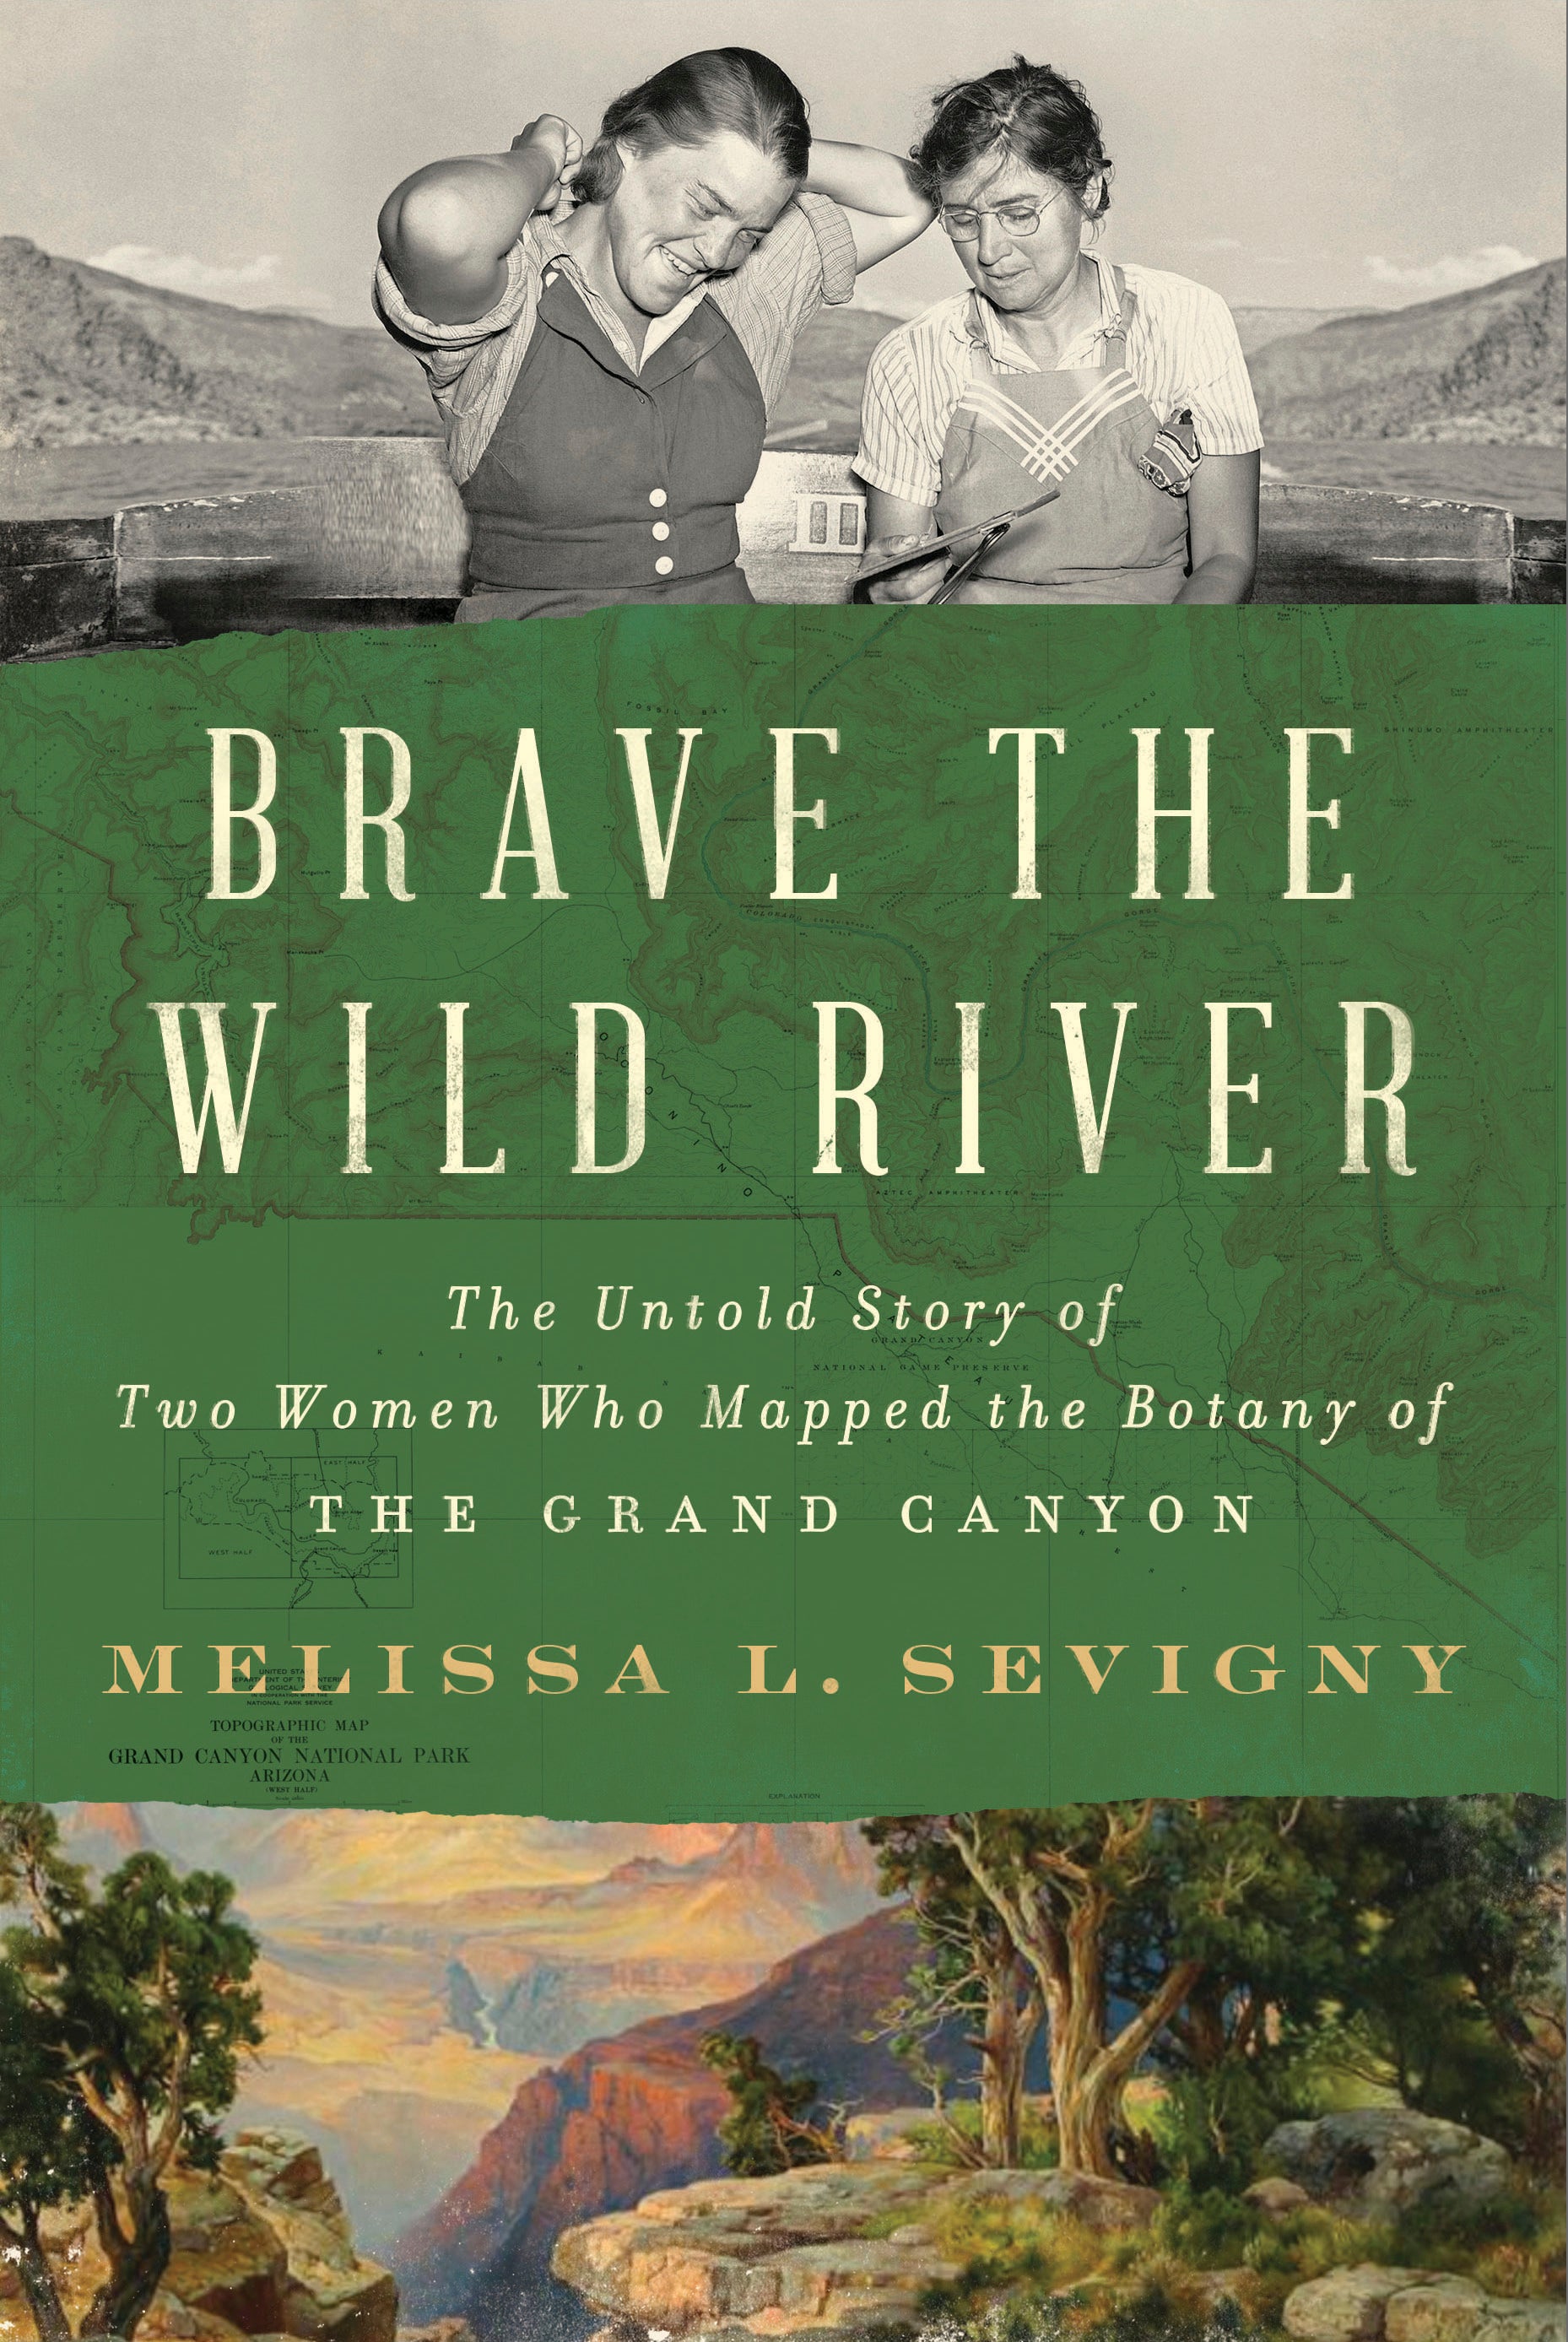 Book Review In Brave the Wild River, the true story of 2 scientists who explored the Grand Canyon The Independent